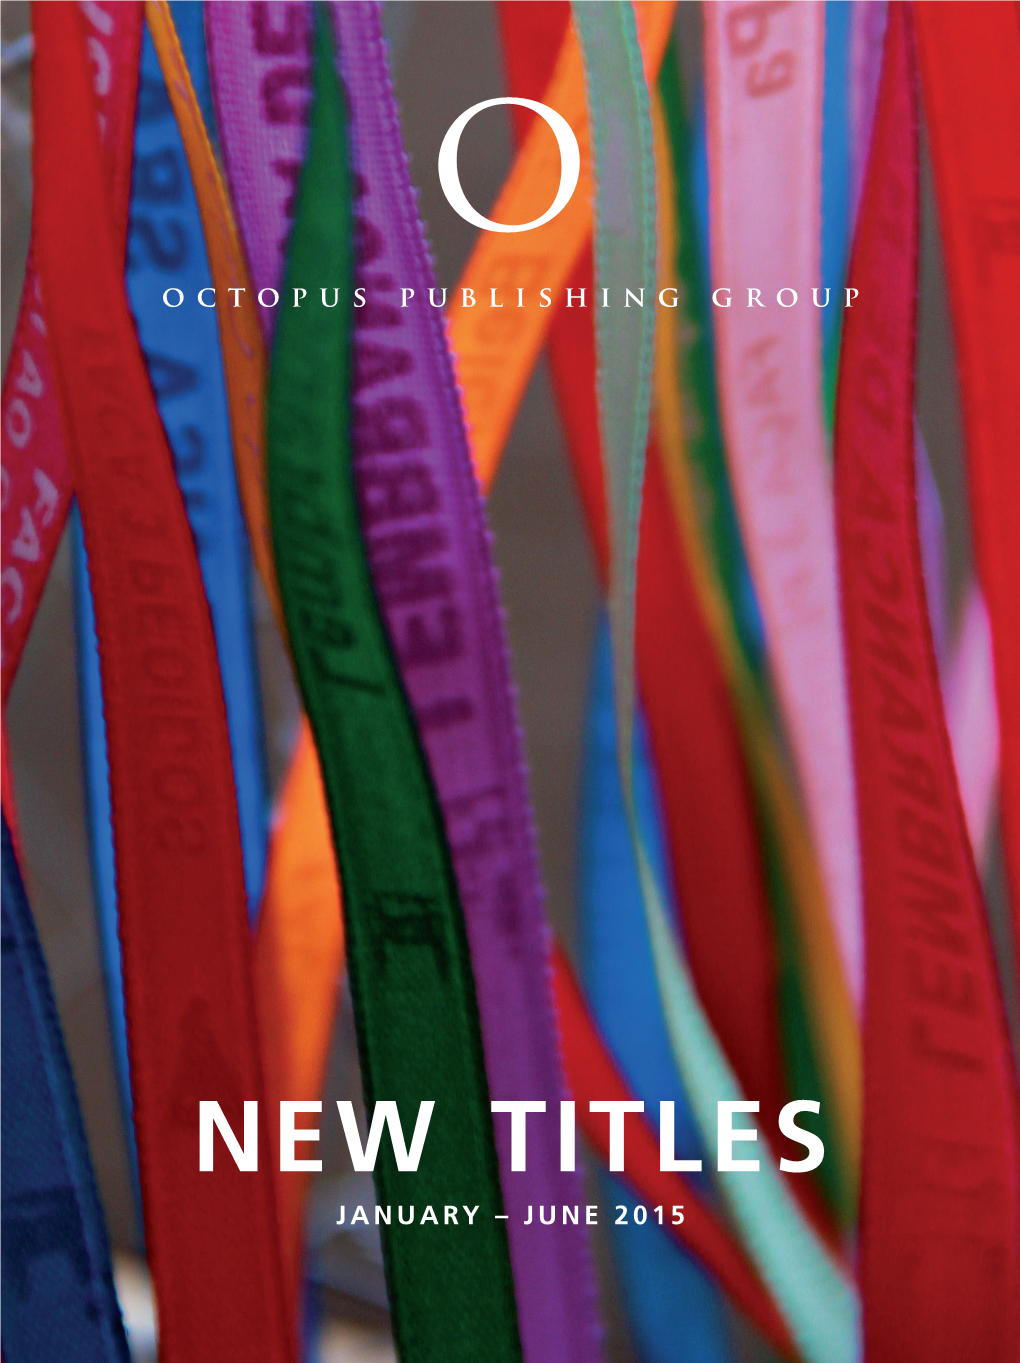 New Titles January – June 2015 Welcome to the Octopus Spring / Summer 2015 New Titles Catalogue